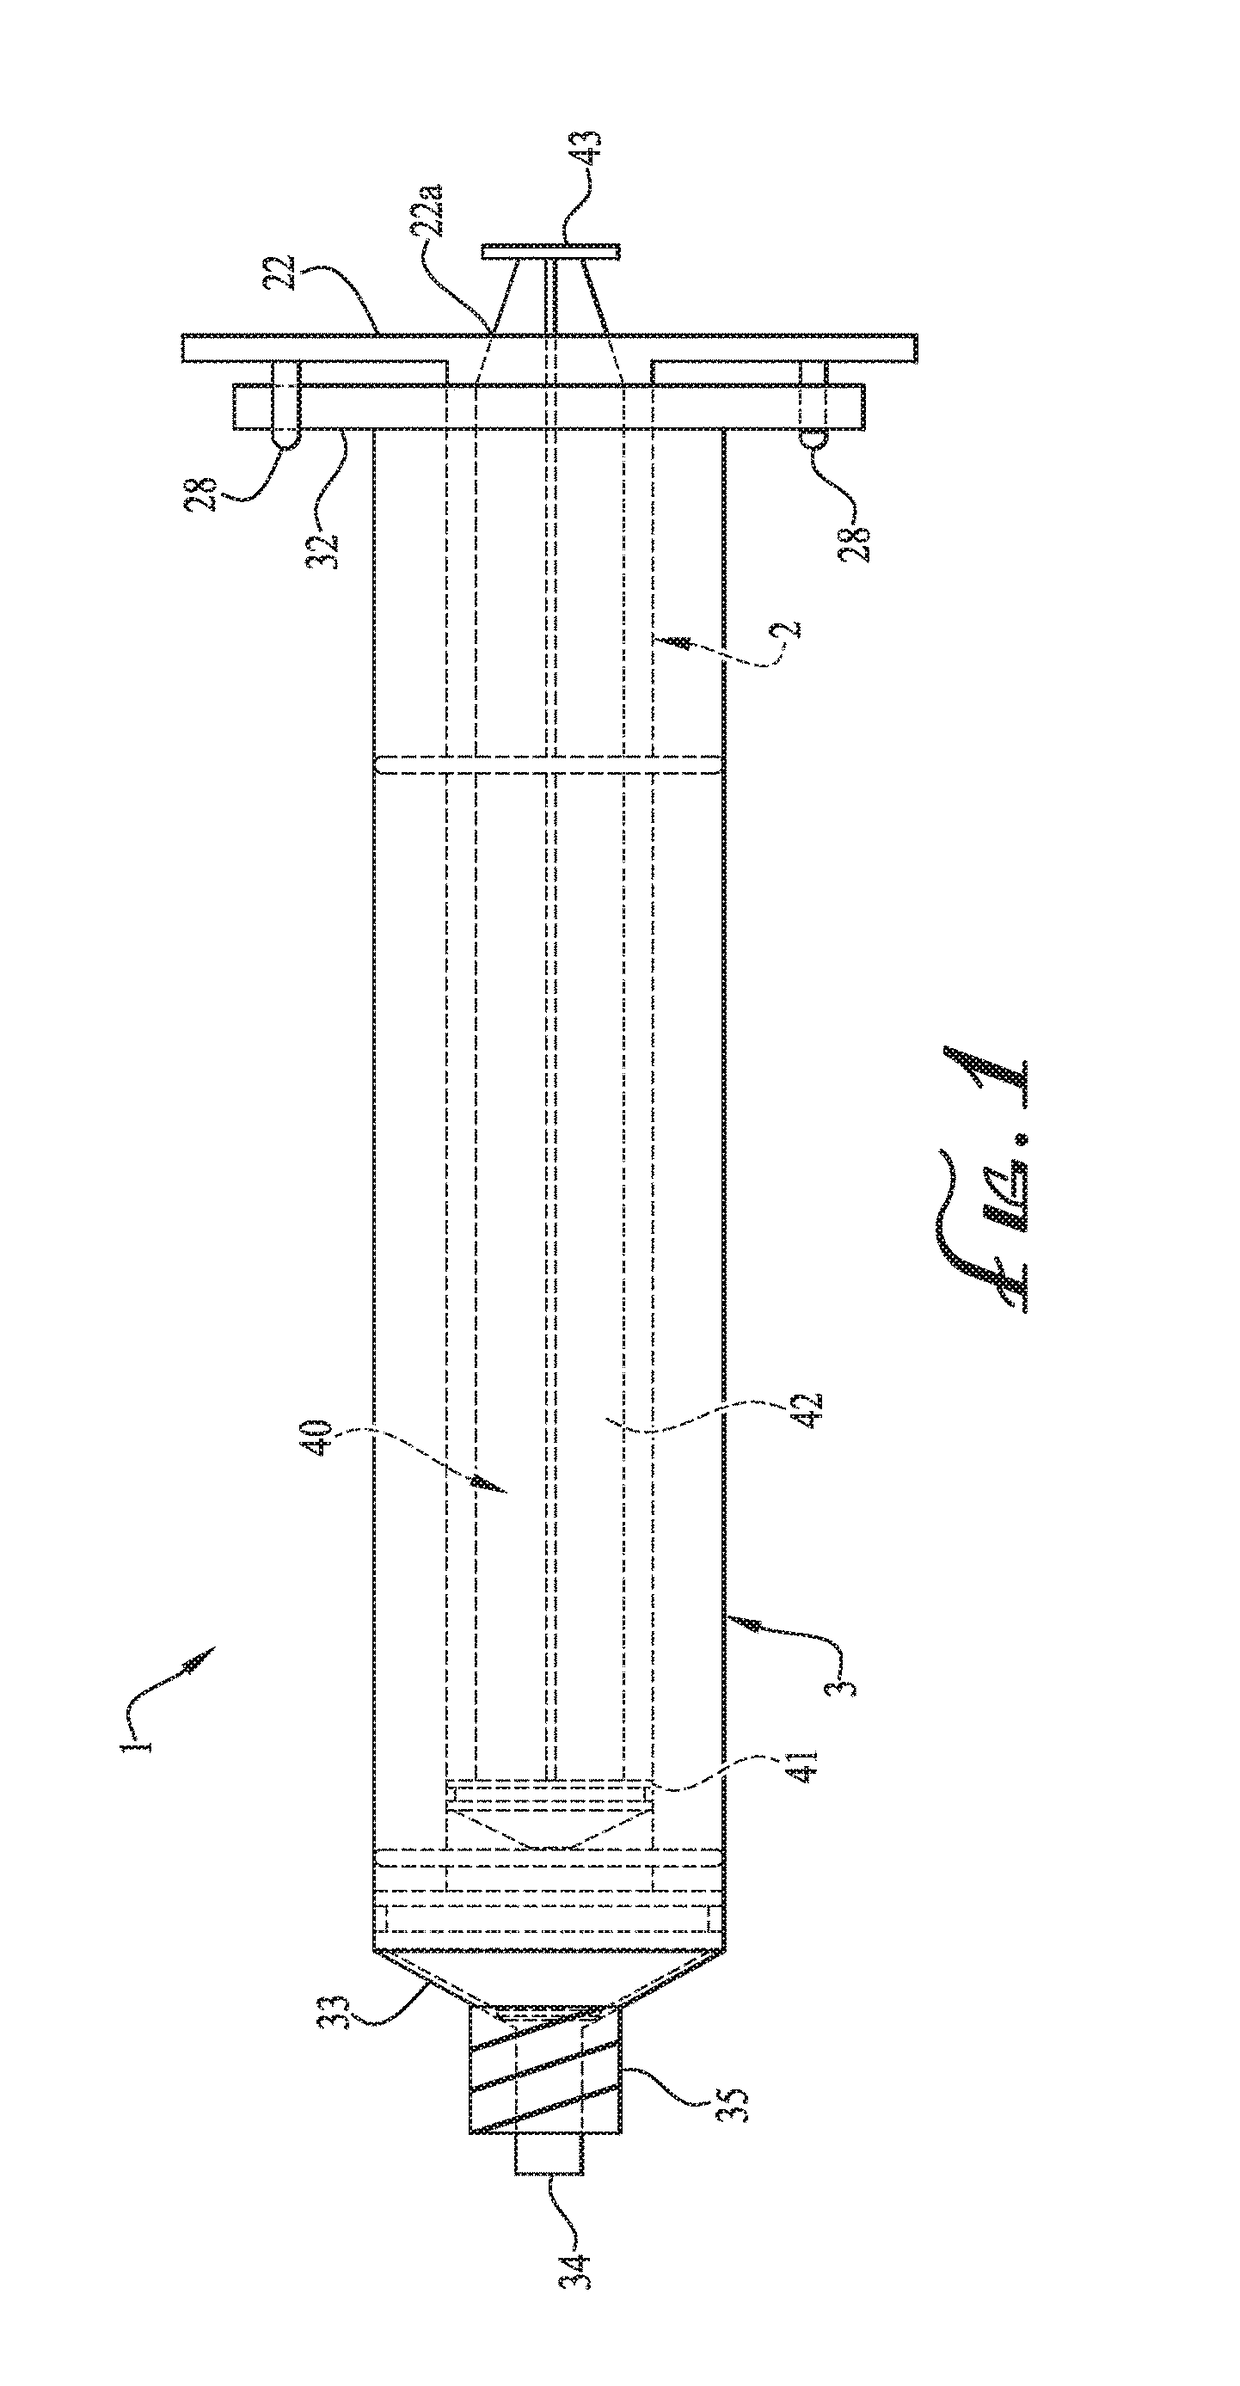 Syringe assembly for withdrawing two separate portions of fluid following a single engagement with fluid port